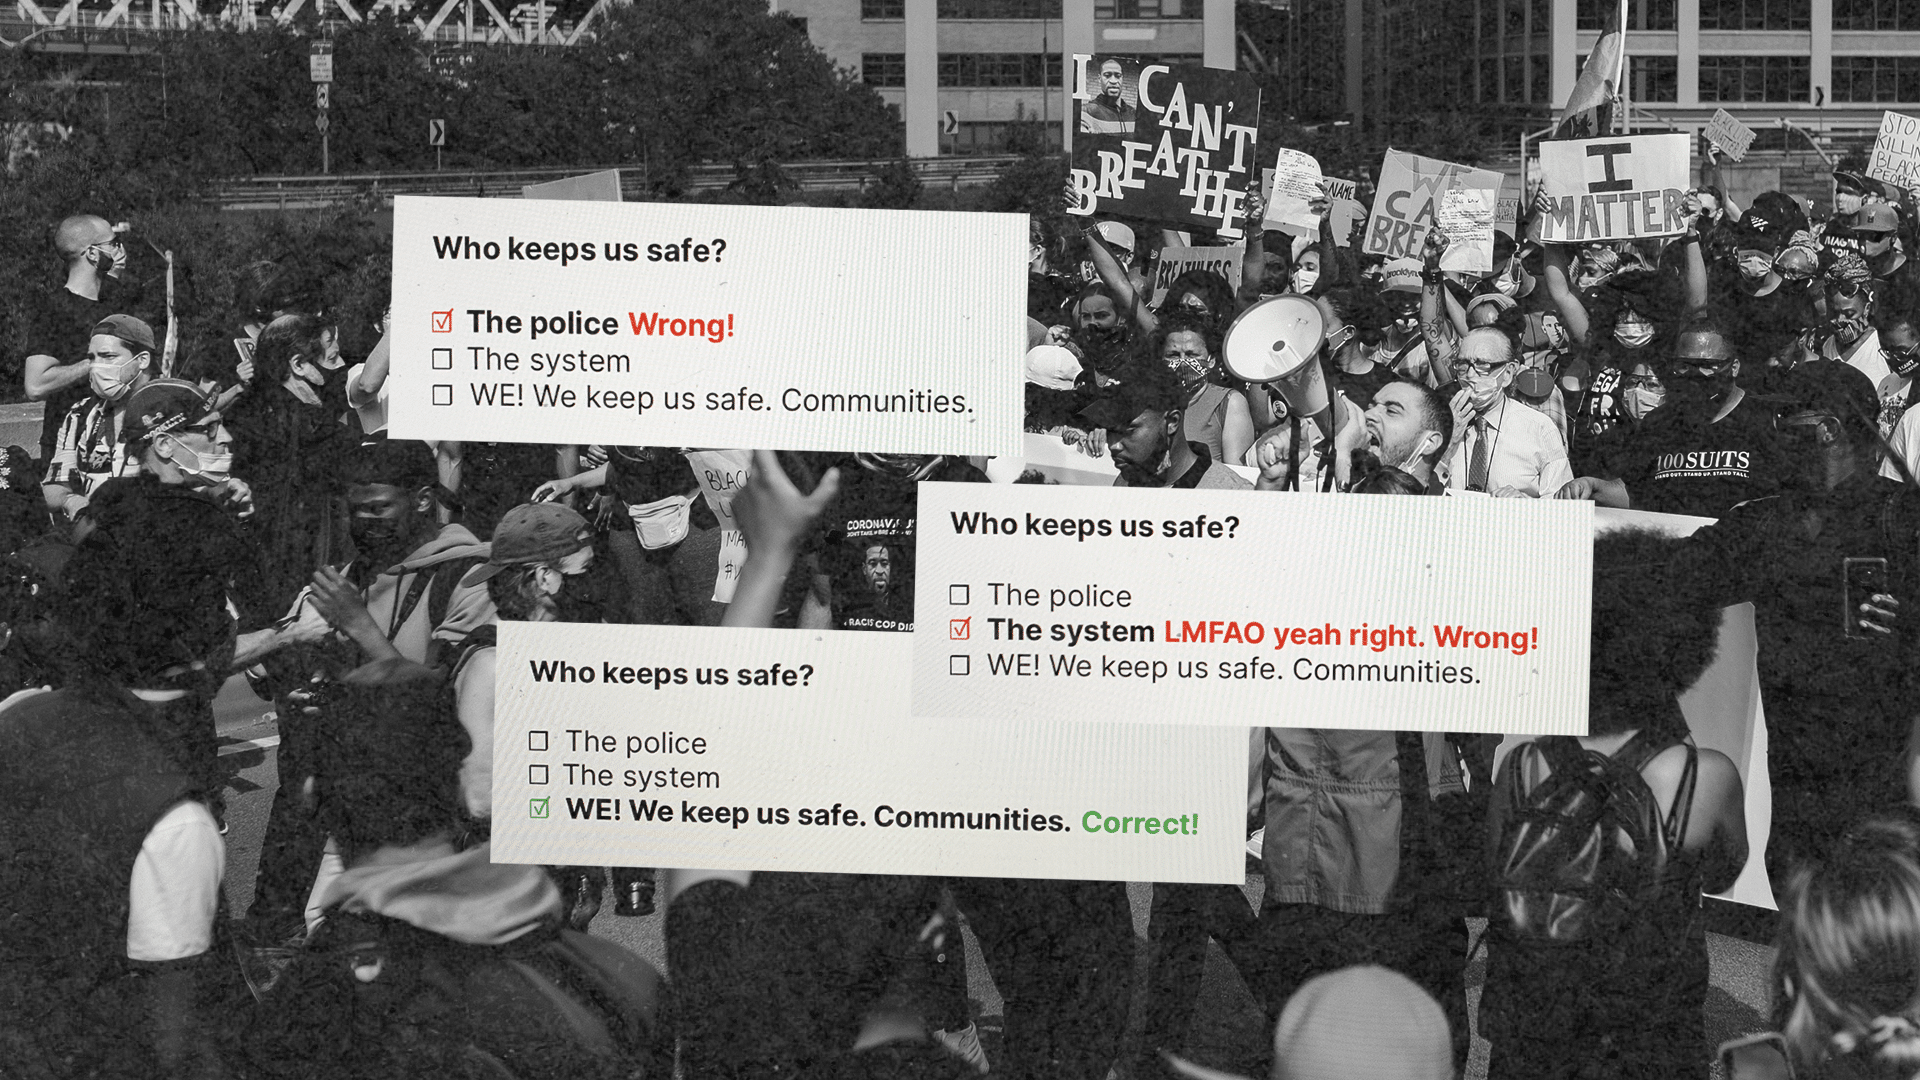 Collage of multiple choice questions asking "Who keeps us safe?". Answers include: "The police - Wrong!", "The system - LMFAO yeah right. Wrong!" and "WE! We keep us safe. Communities. - Correct!". The questions are laid over a photo of a Black Lives Matter protest.